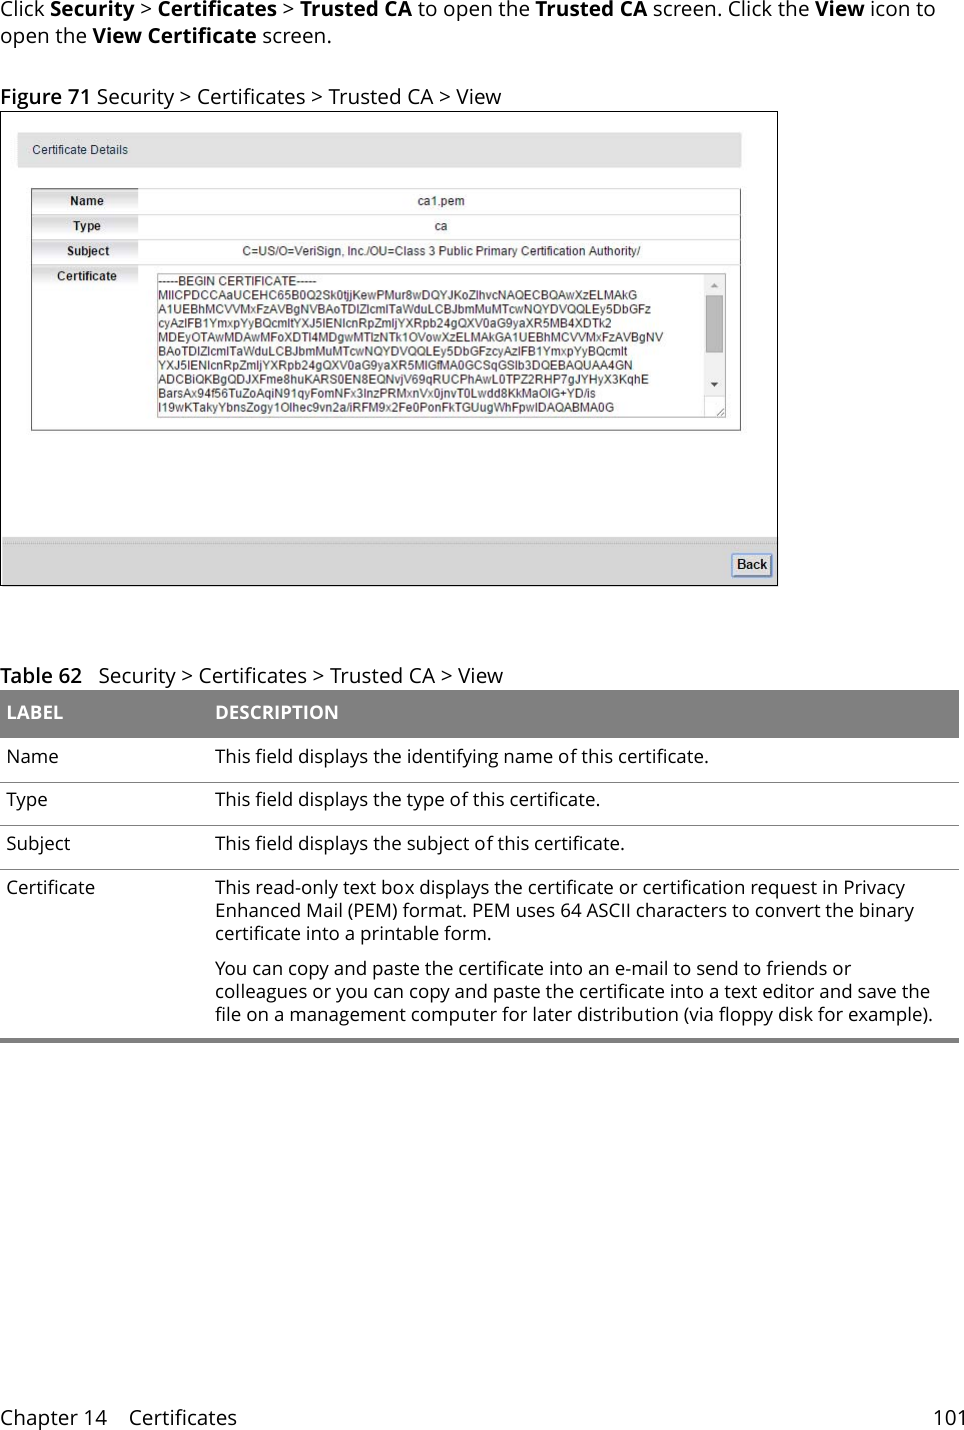 Chapter 14    Certificates 101Click Security &gt; Certificates &gt; Trusted CA to open the Trusted CA screen. Click the View icon to open the View Certificate screen. Figure 71 Security &gt; Certificates &gt; Trusted CA &gt; View Table 62   Security &gt; Certificates &gt; Trusted CA &gt; View LABEL DESCRIPTIONName This field displays the identifying name of this certificate.Type This field displays the type of this certificate.Subject  This field displays the subject of this certificate.Certificate This read-only text box displays the certificate or certification request in Privacy Enhanced Mail (PEM) format. PEM uses 64 ASCII characters to convert the binary certificate into a printable form. You can copy and paste the certificate into an e-mail to send to friends or colleagues or you can copy and paste the certificate into a text editor and save the file on a management computer for later distribution (via floppy disk for example).